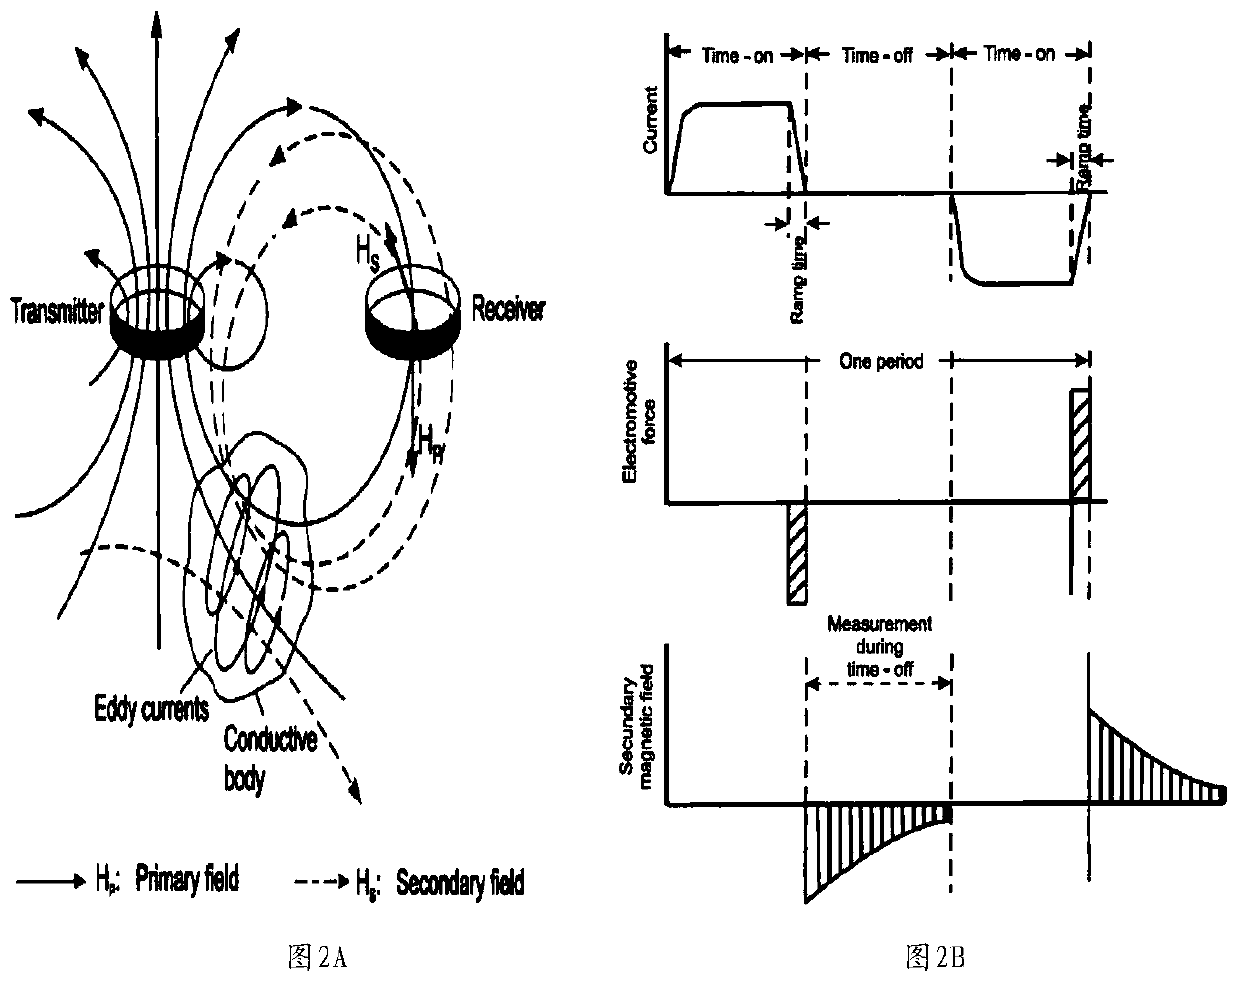 Electrical source transient electromagnet ground-air detection method